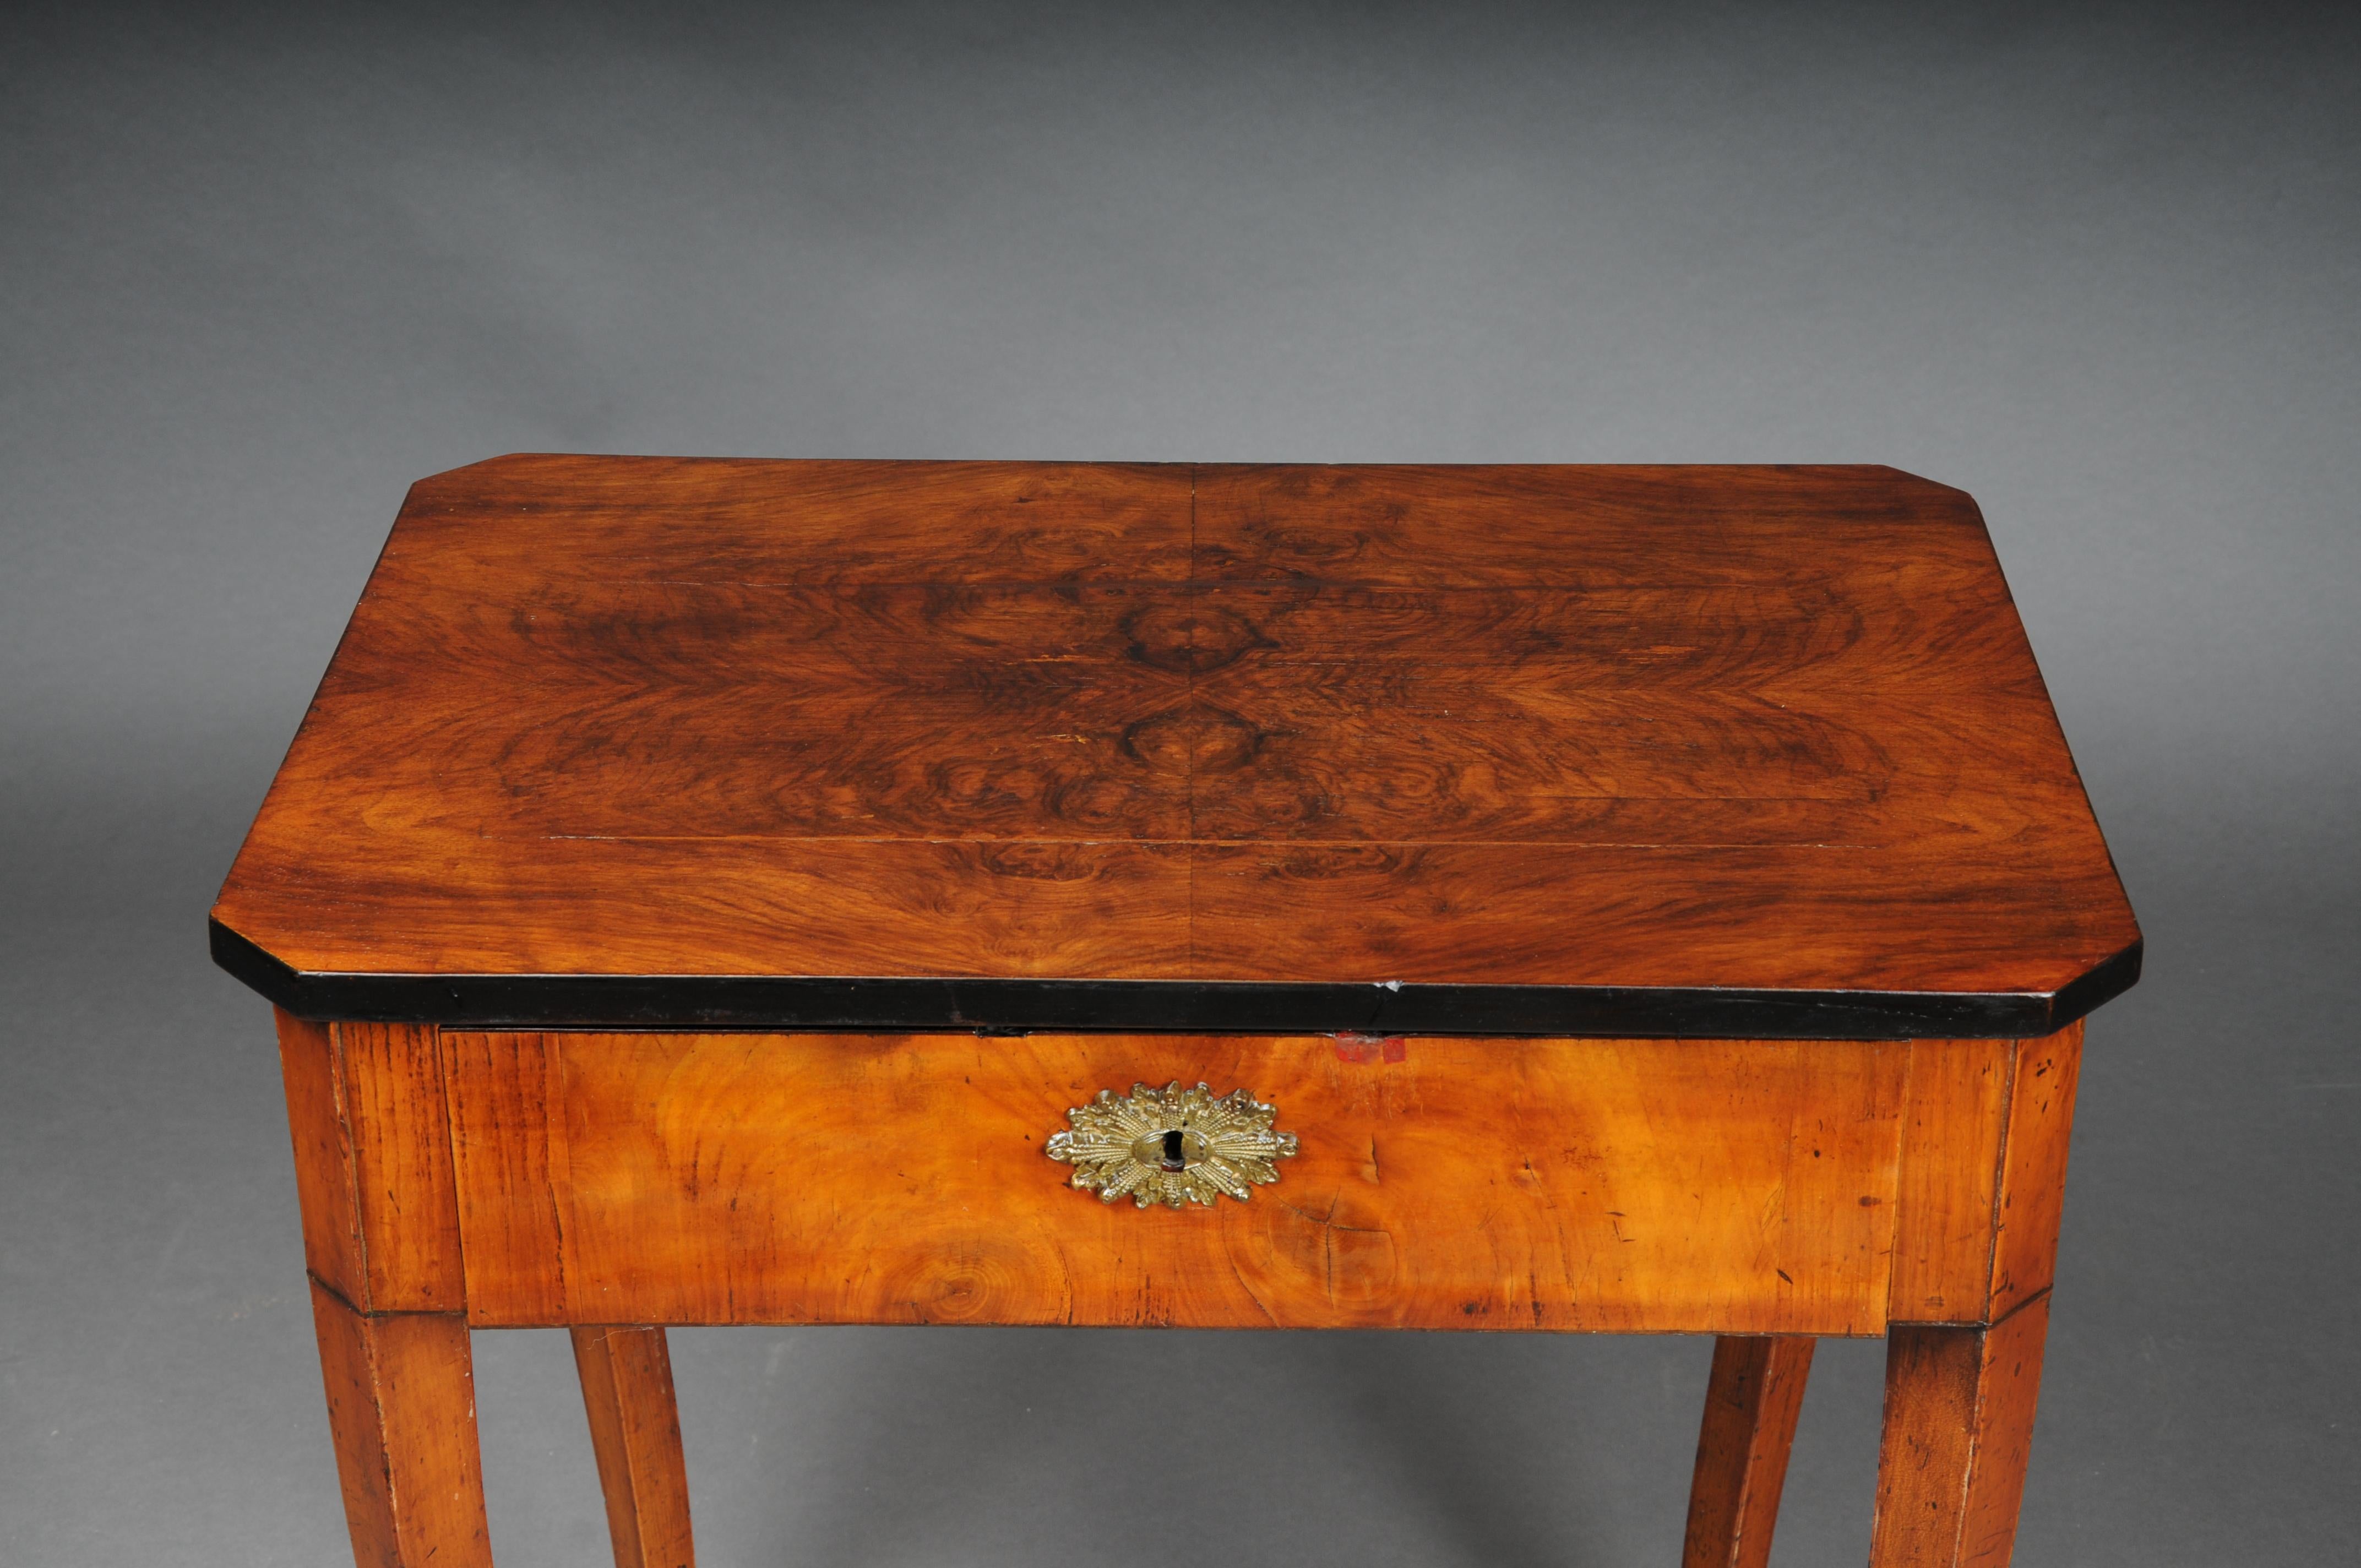 Beautiful side table/sewing table South German around 1860

Solid wood partially ebonized. Foldable cover plate in root veneer. Interior with numerous intermediate compartments. Lockable with padlock and key. High, slightly curved saber legs.